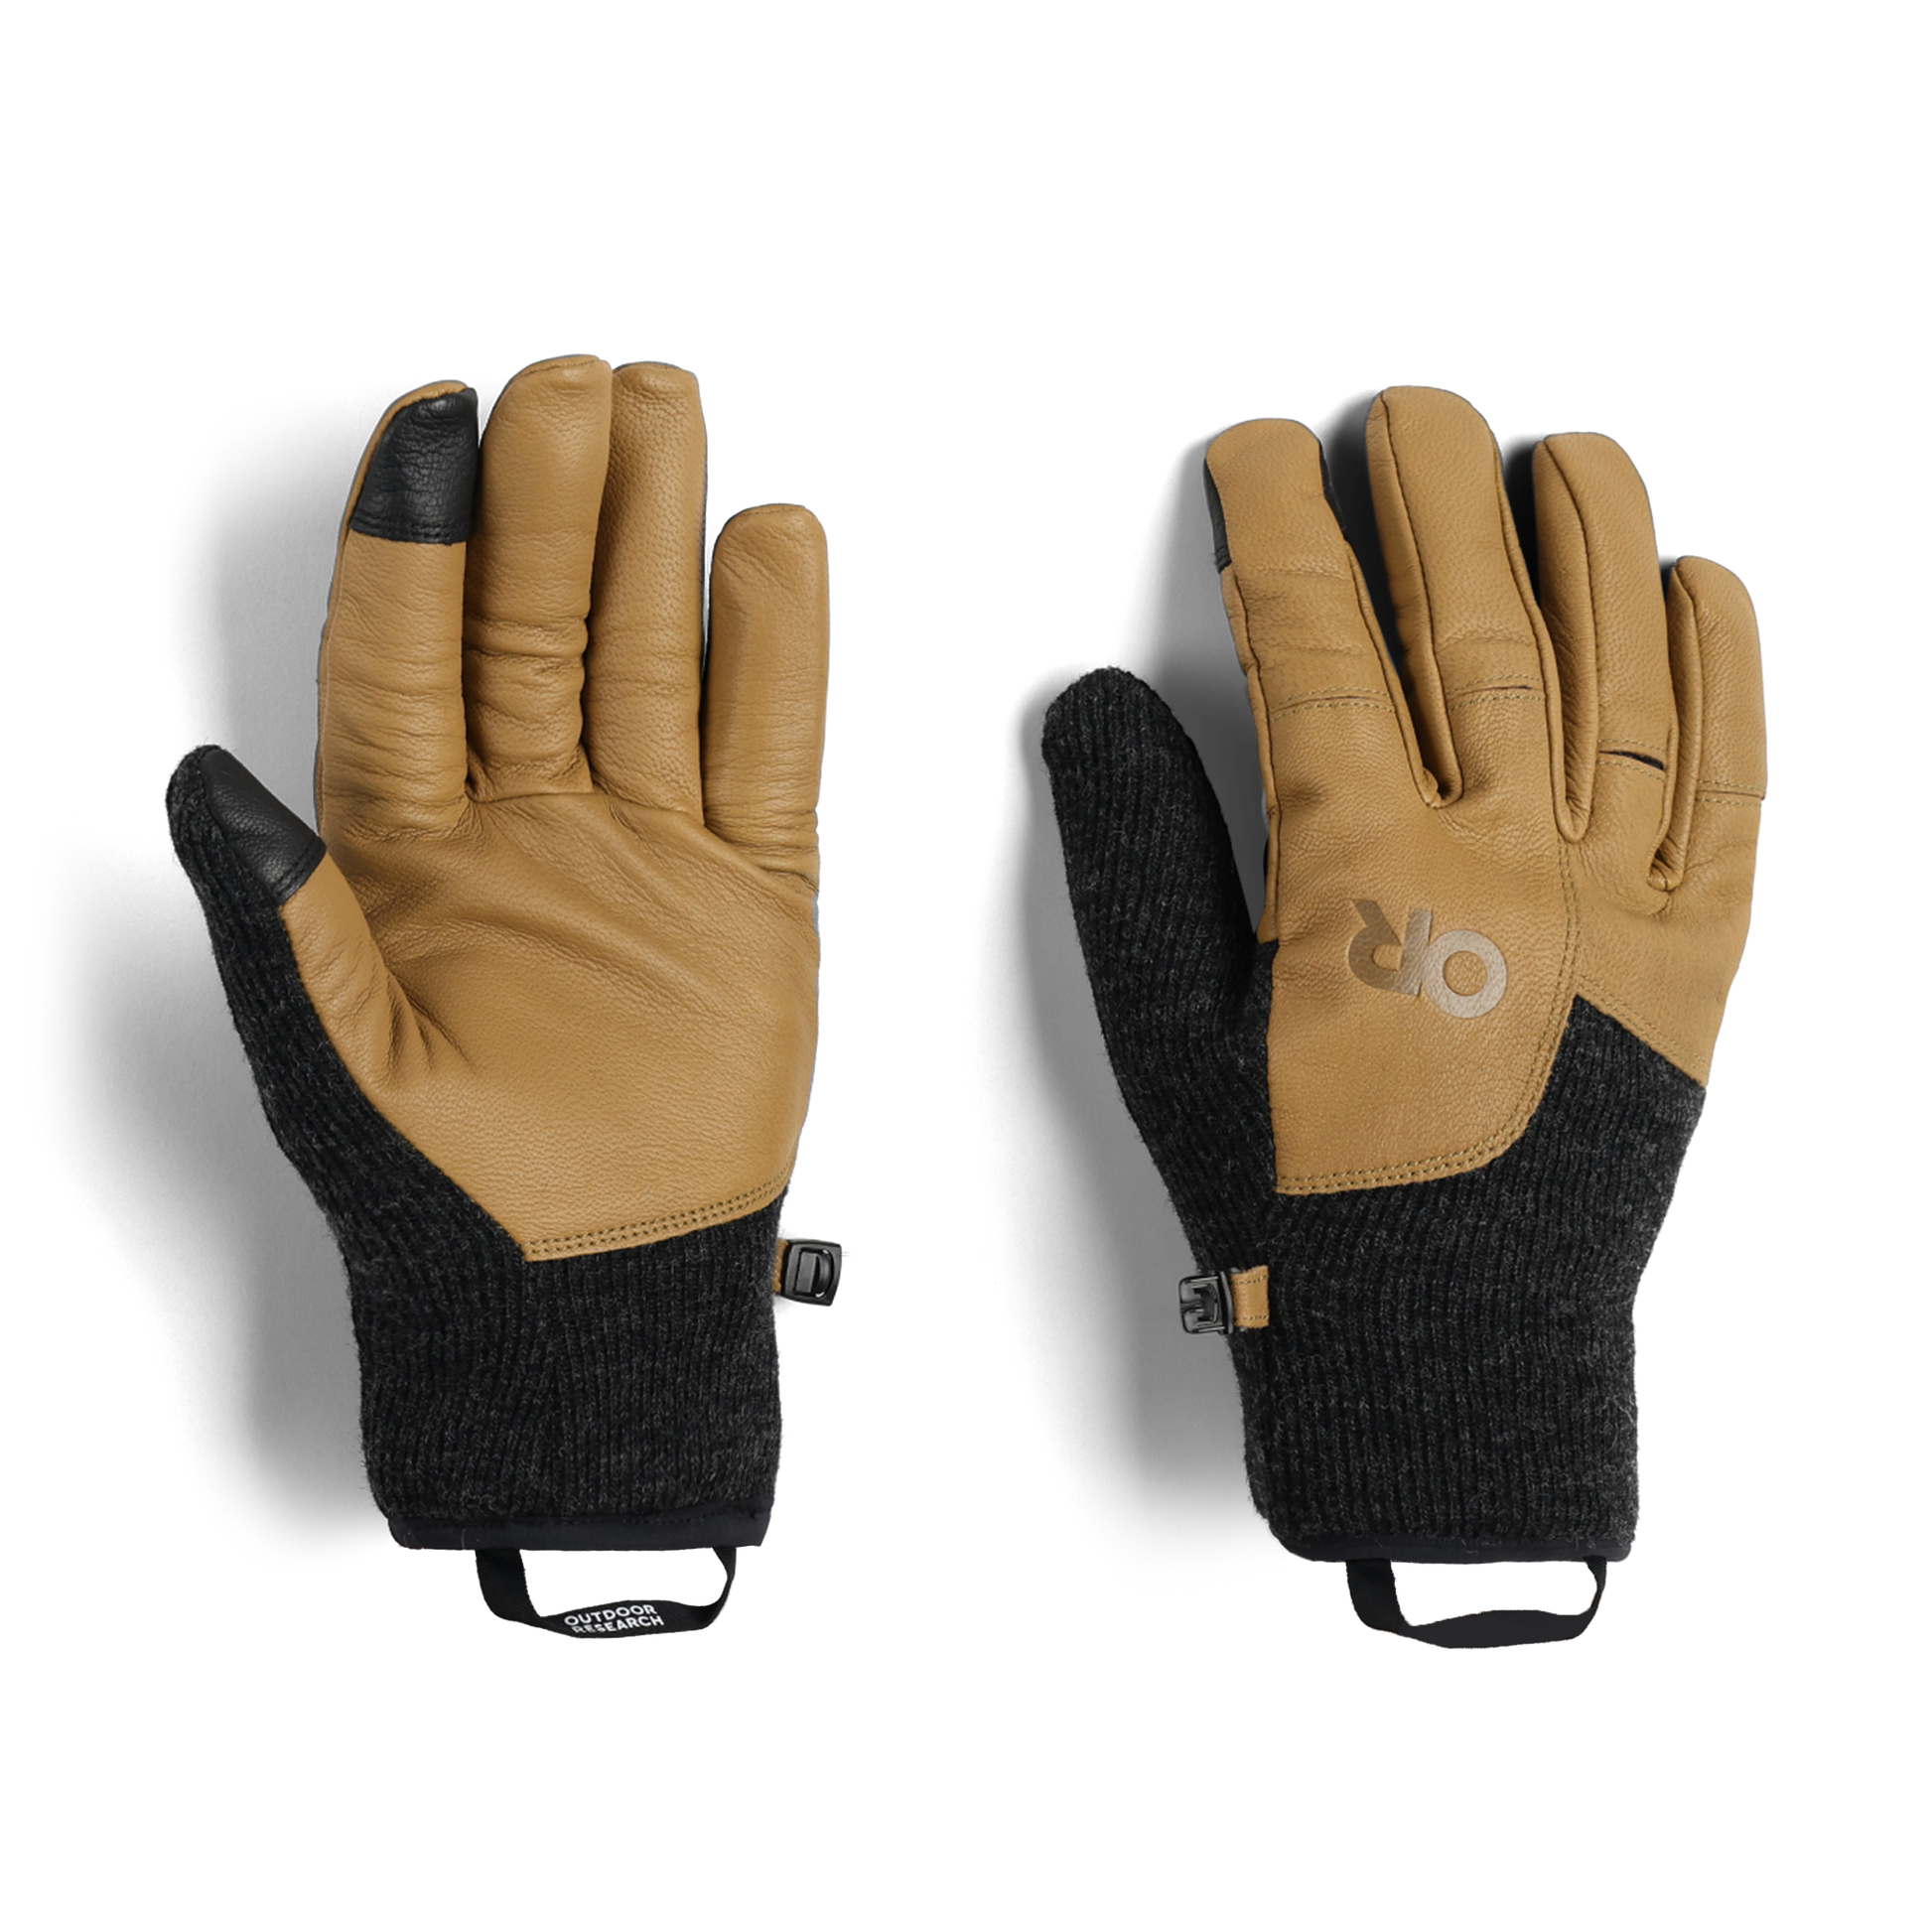 Outdoor Research Men's Flurry Driving Gloves Black / S